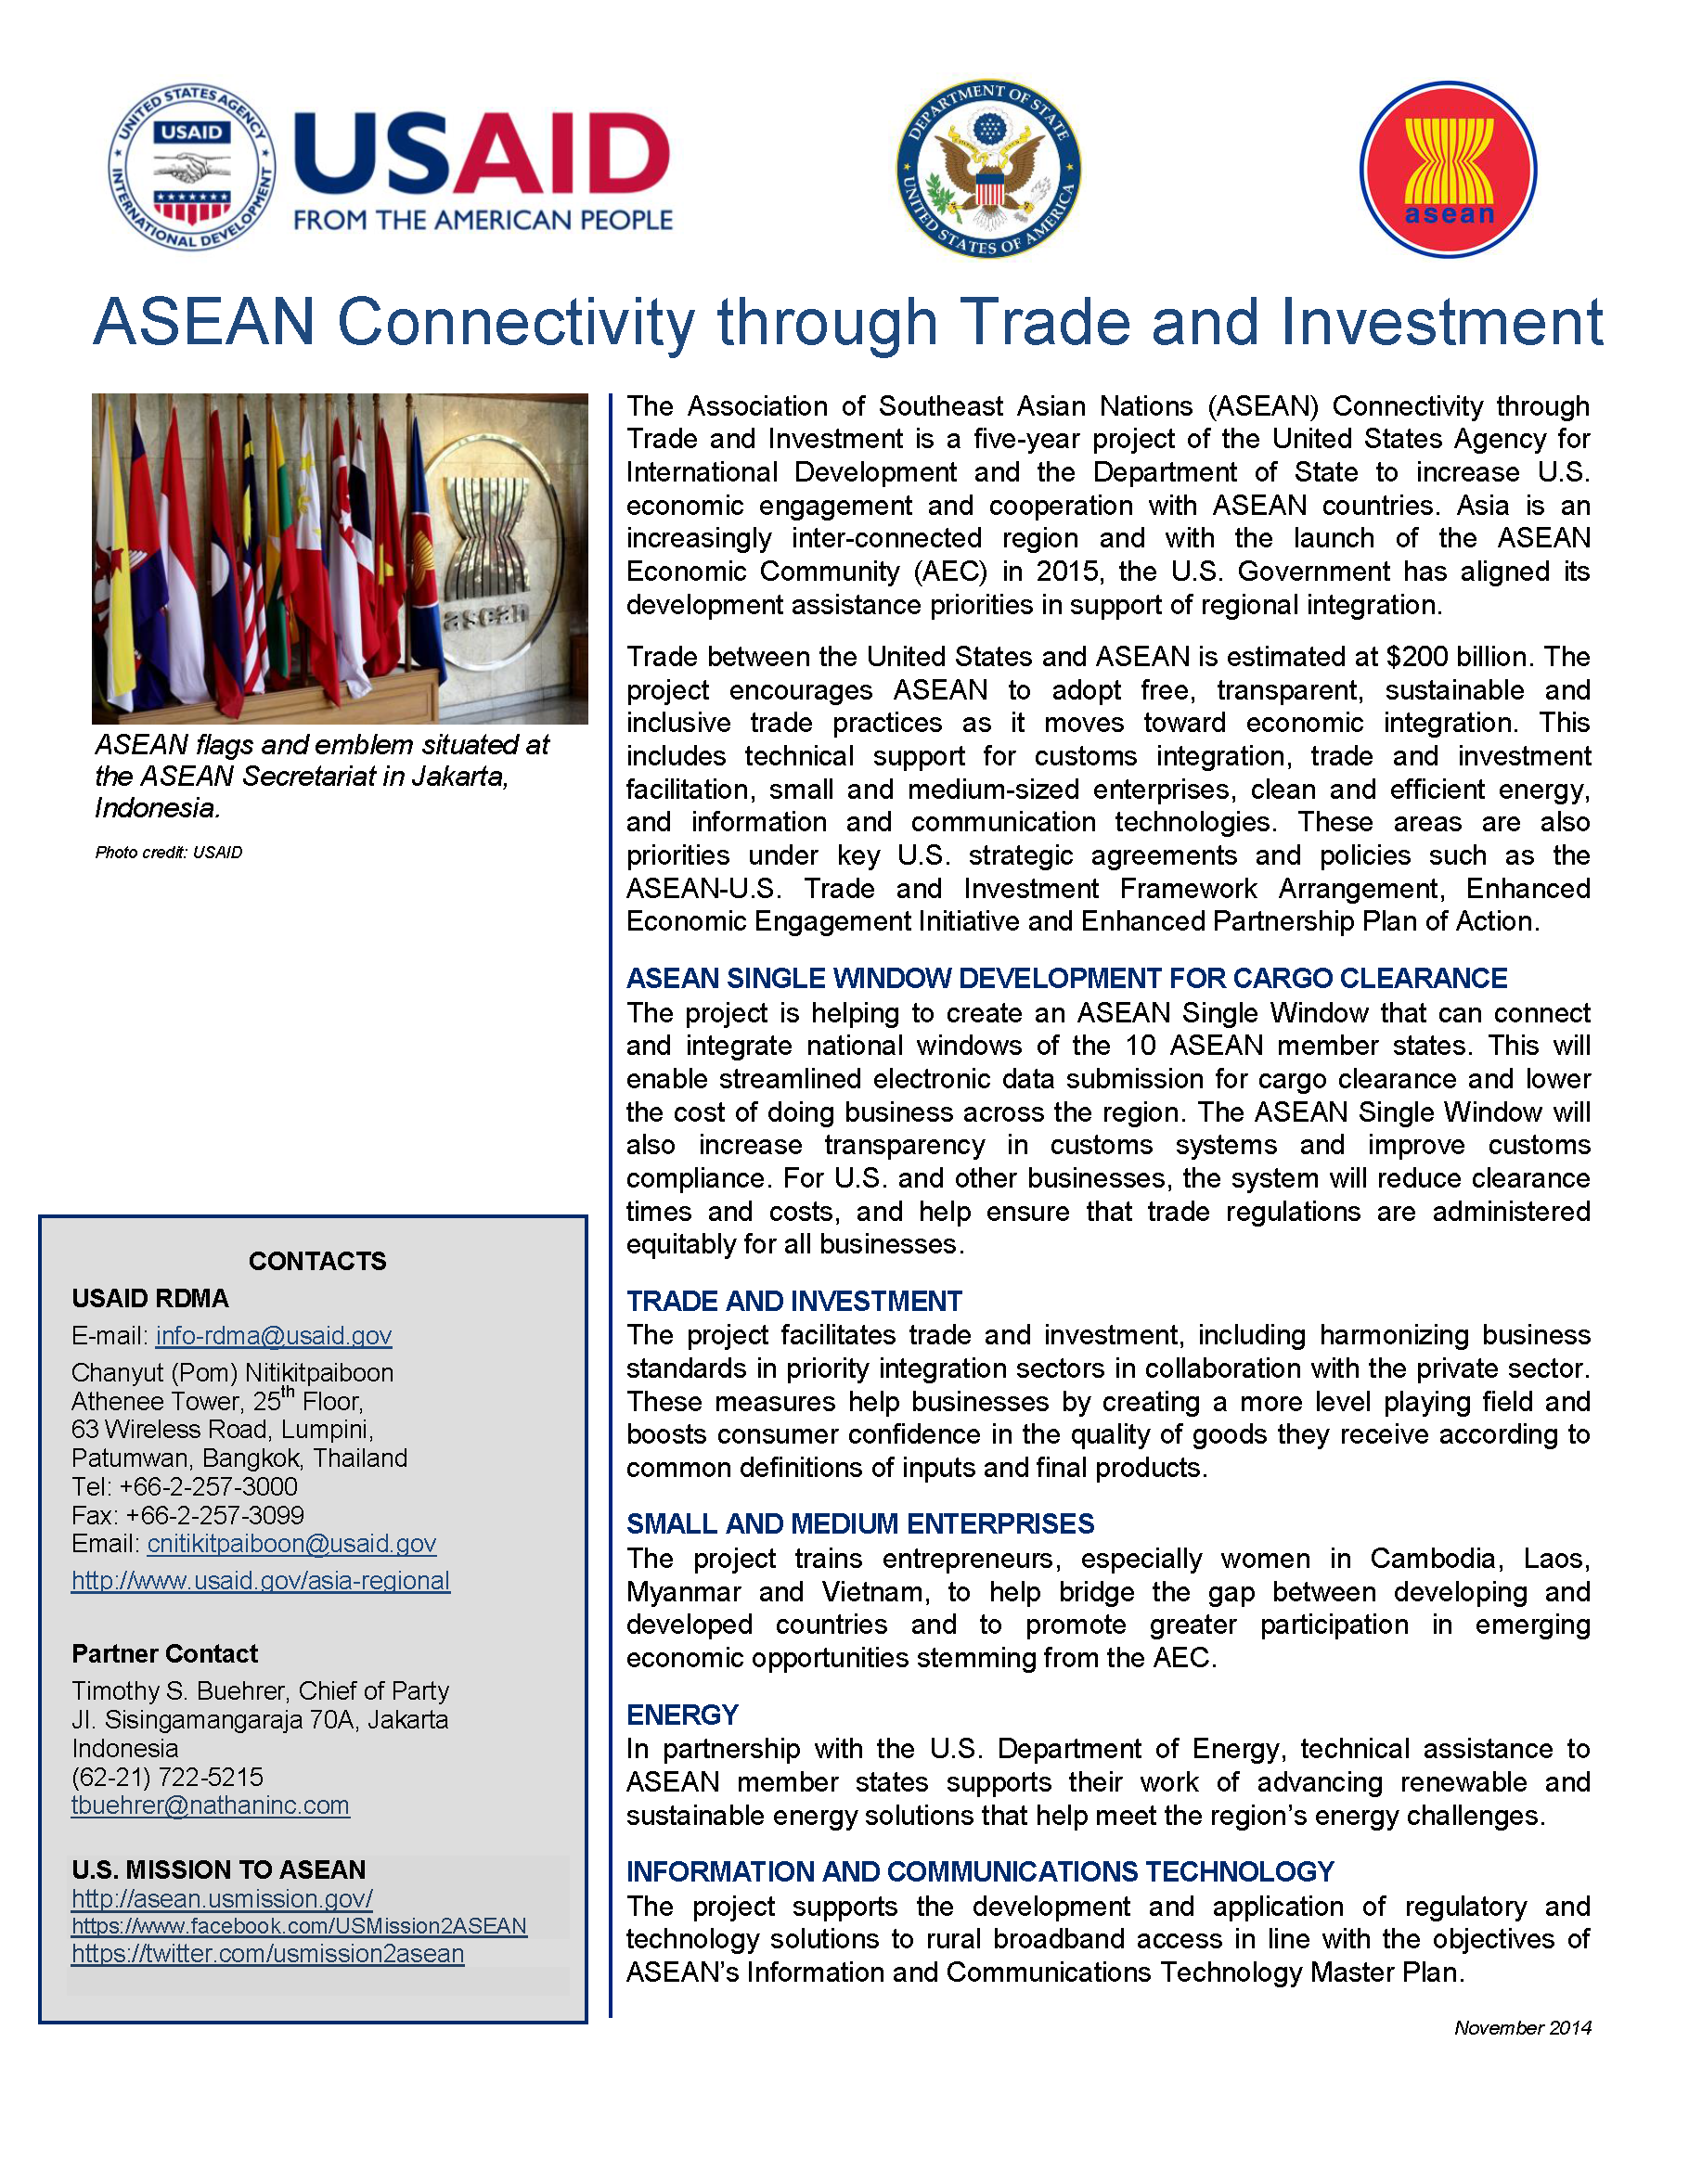 ASEAN Connectivity through Trade and Investment